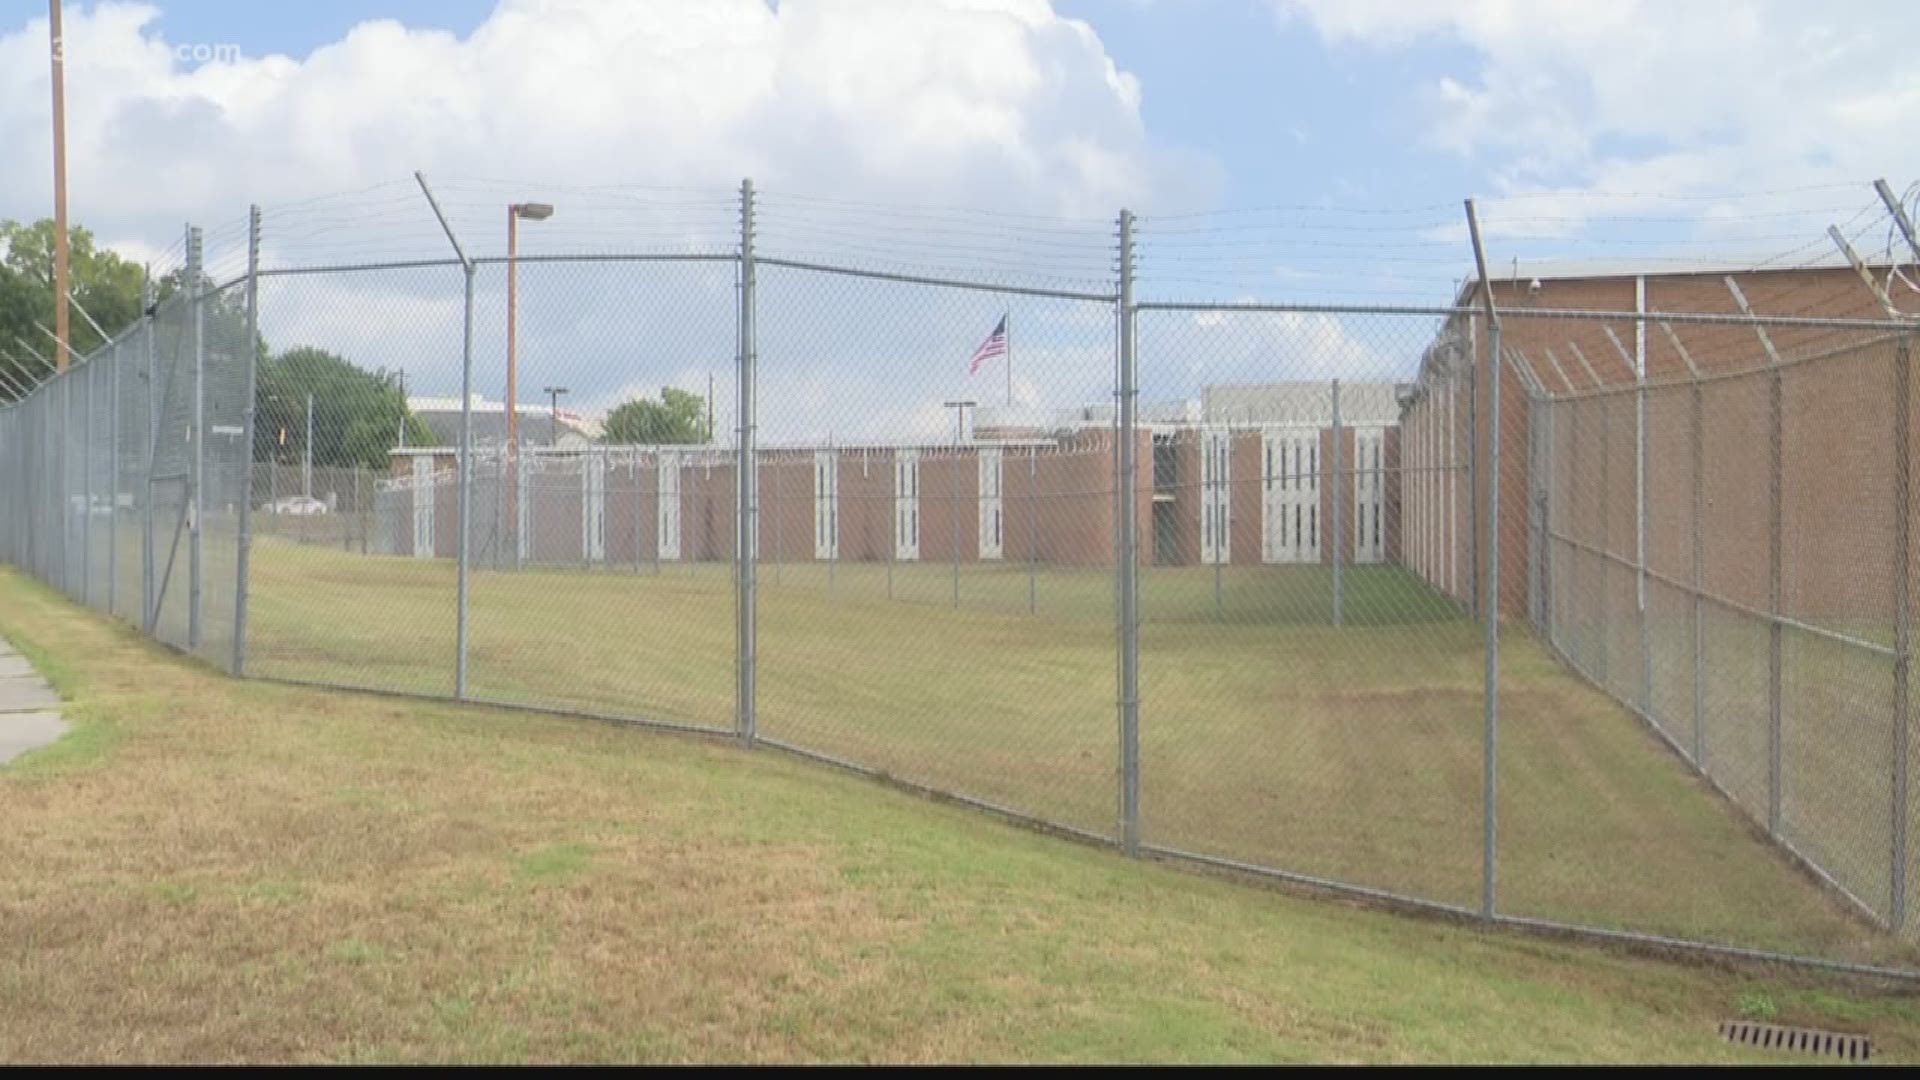 The fight broke out Monday afternoon at the jail on Oglethorpe Street. Bibb deputies are still investigating.